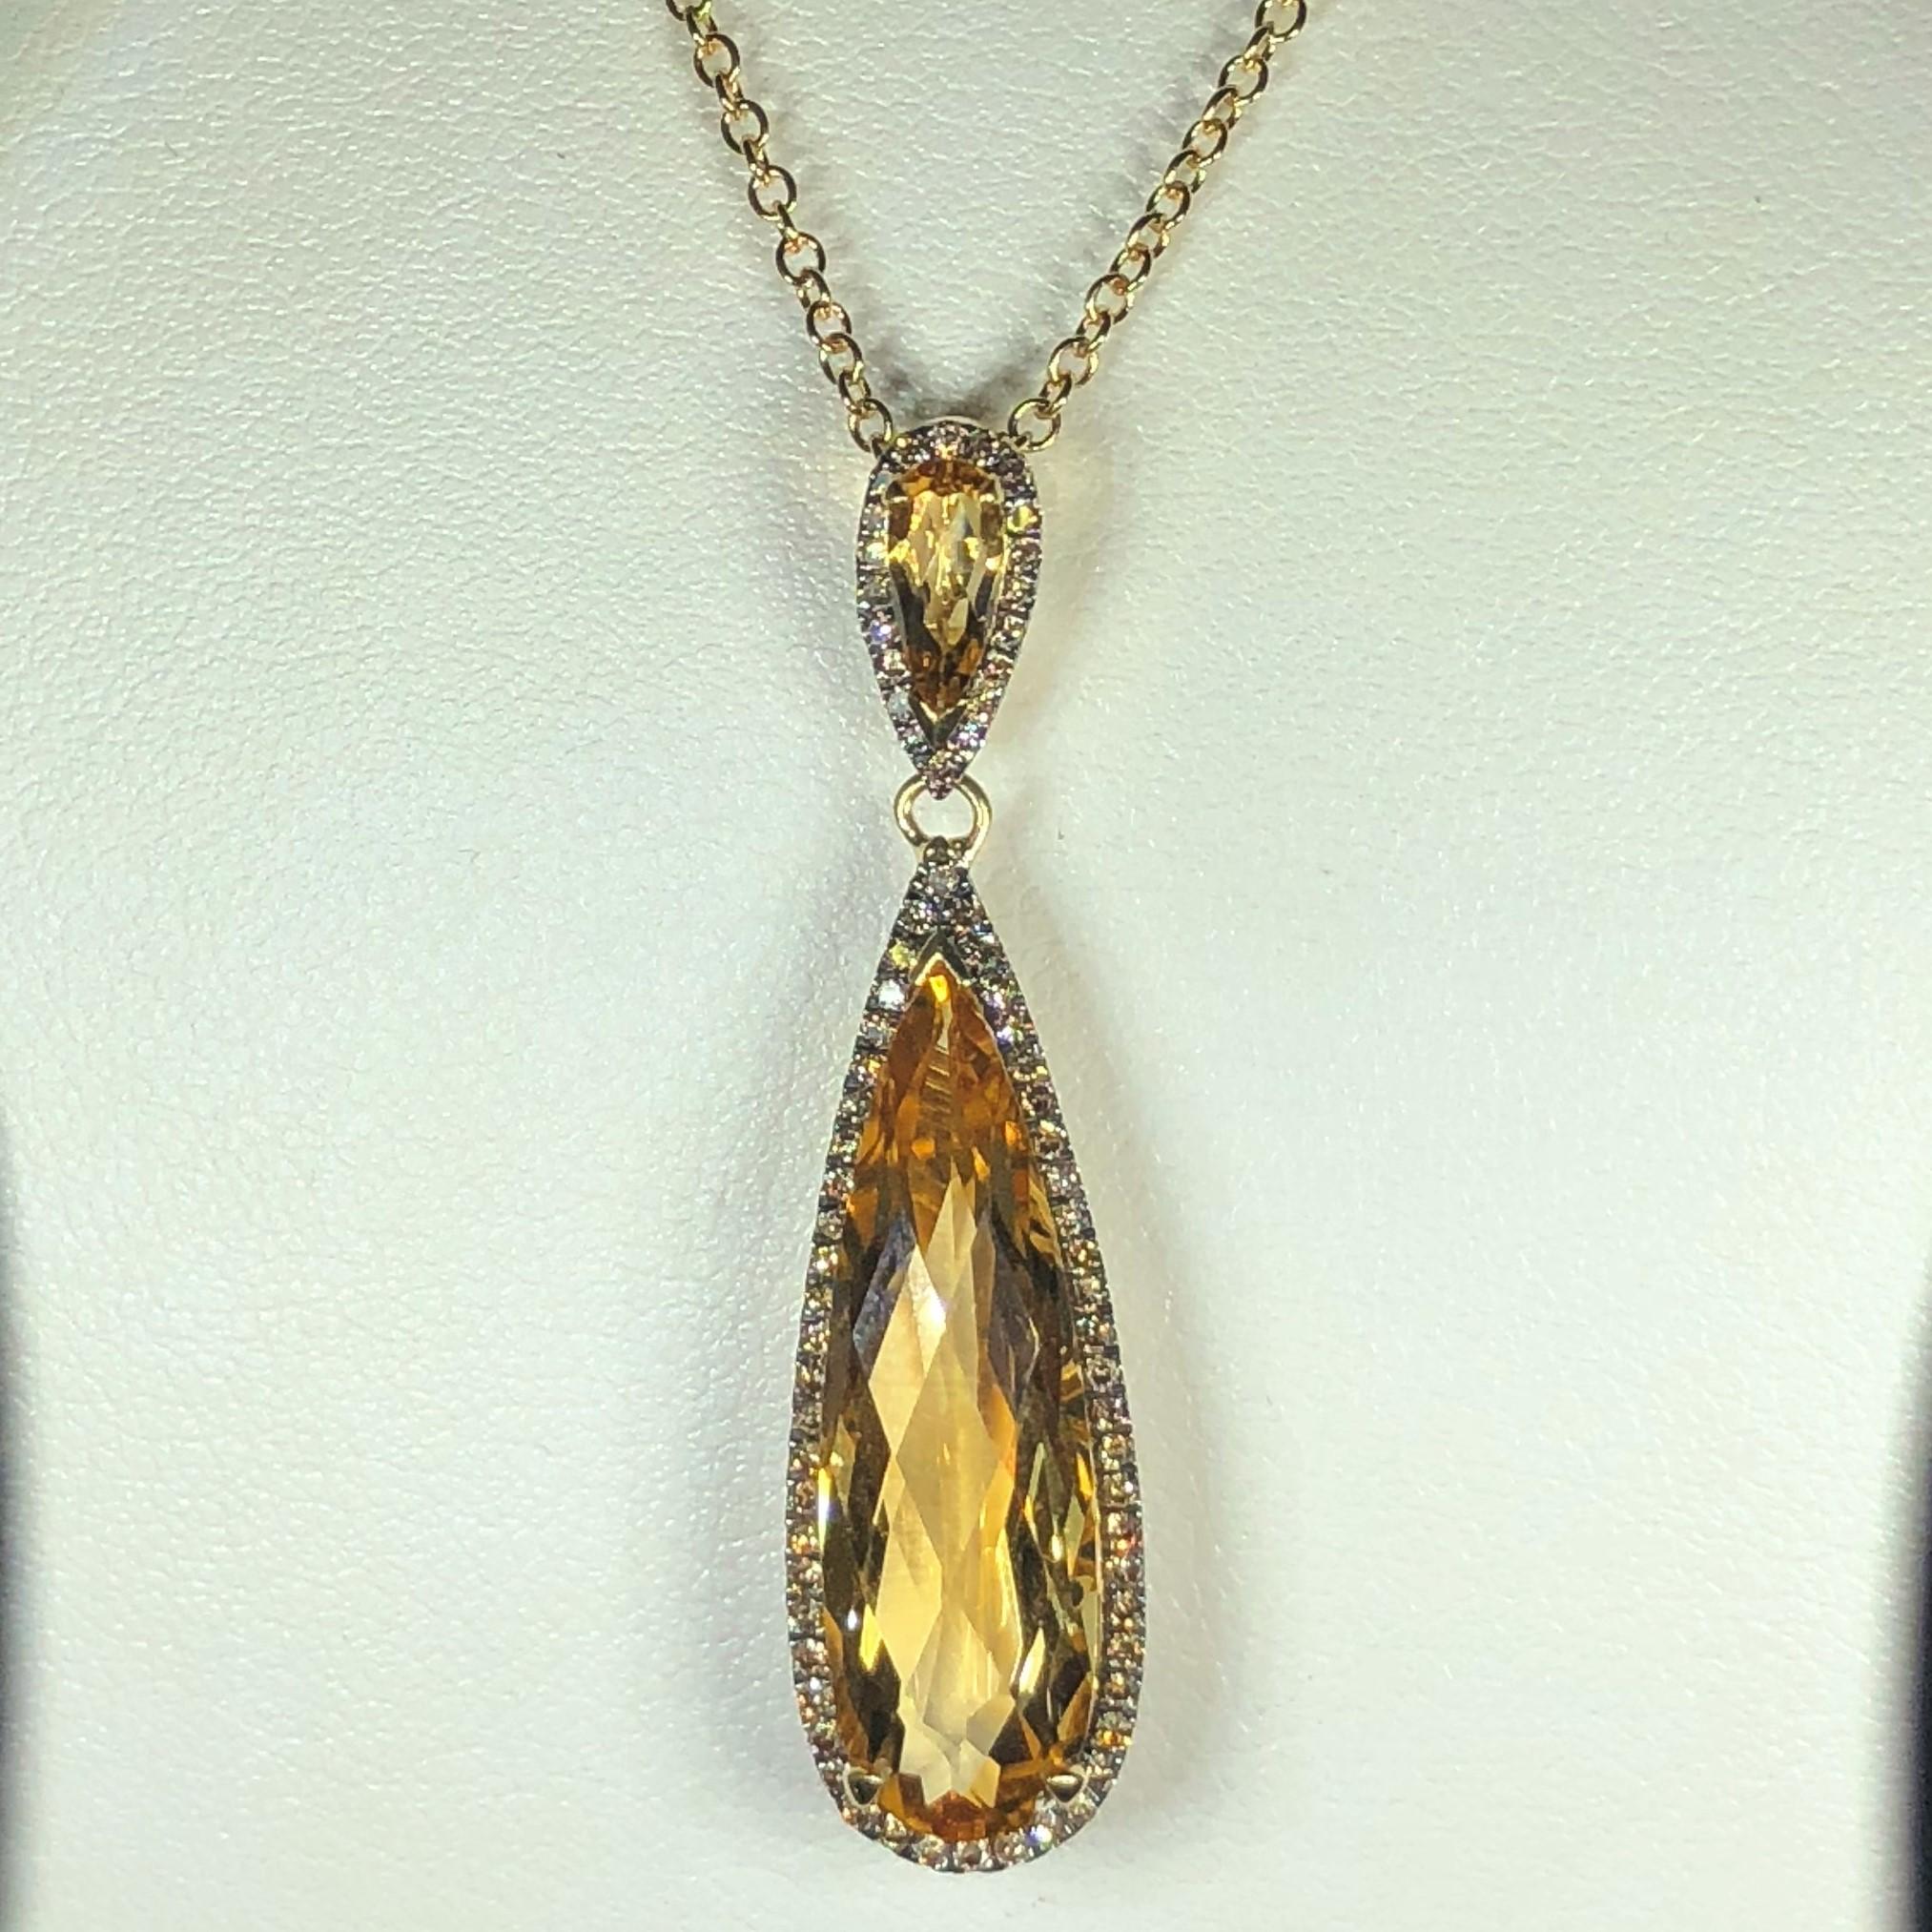 Celebrity 18 kt Yellow Gold Cognac Diamond and Citrine Drop Necklace. This beautiful pendant  is created in 18kt  yellow gold. The pendant is displayed on and sold in combination with an 18kt yellow gold 18' inch wheat link chain. Chain necklace has